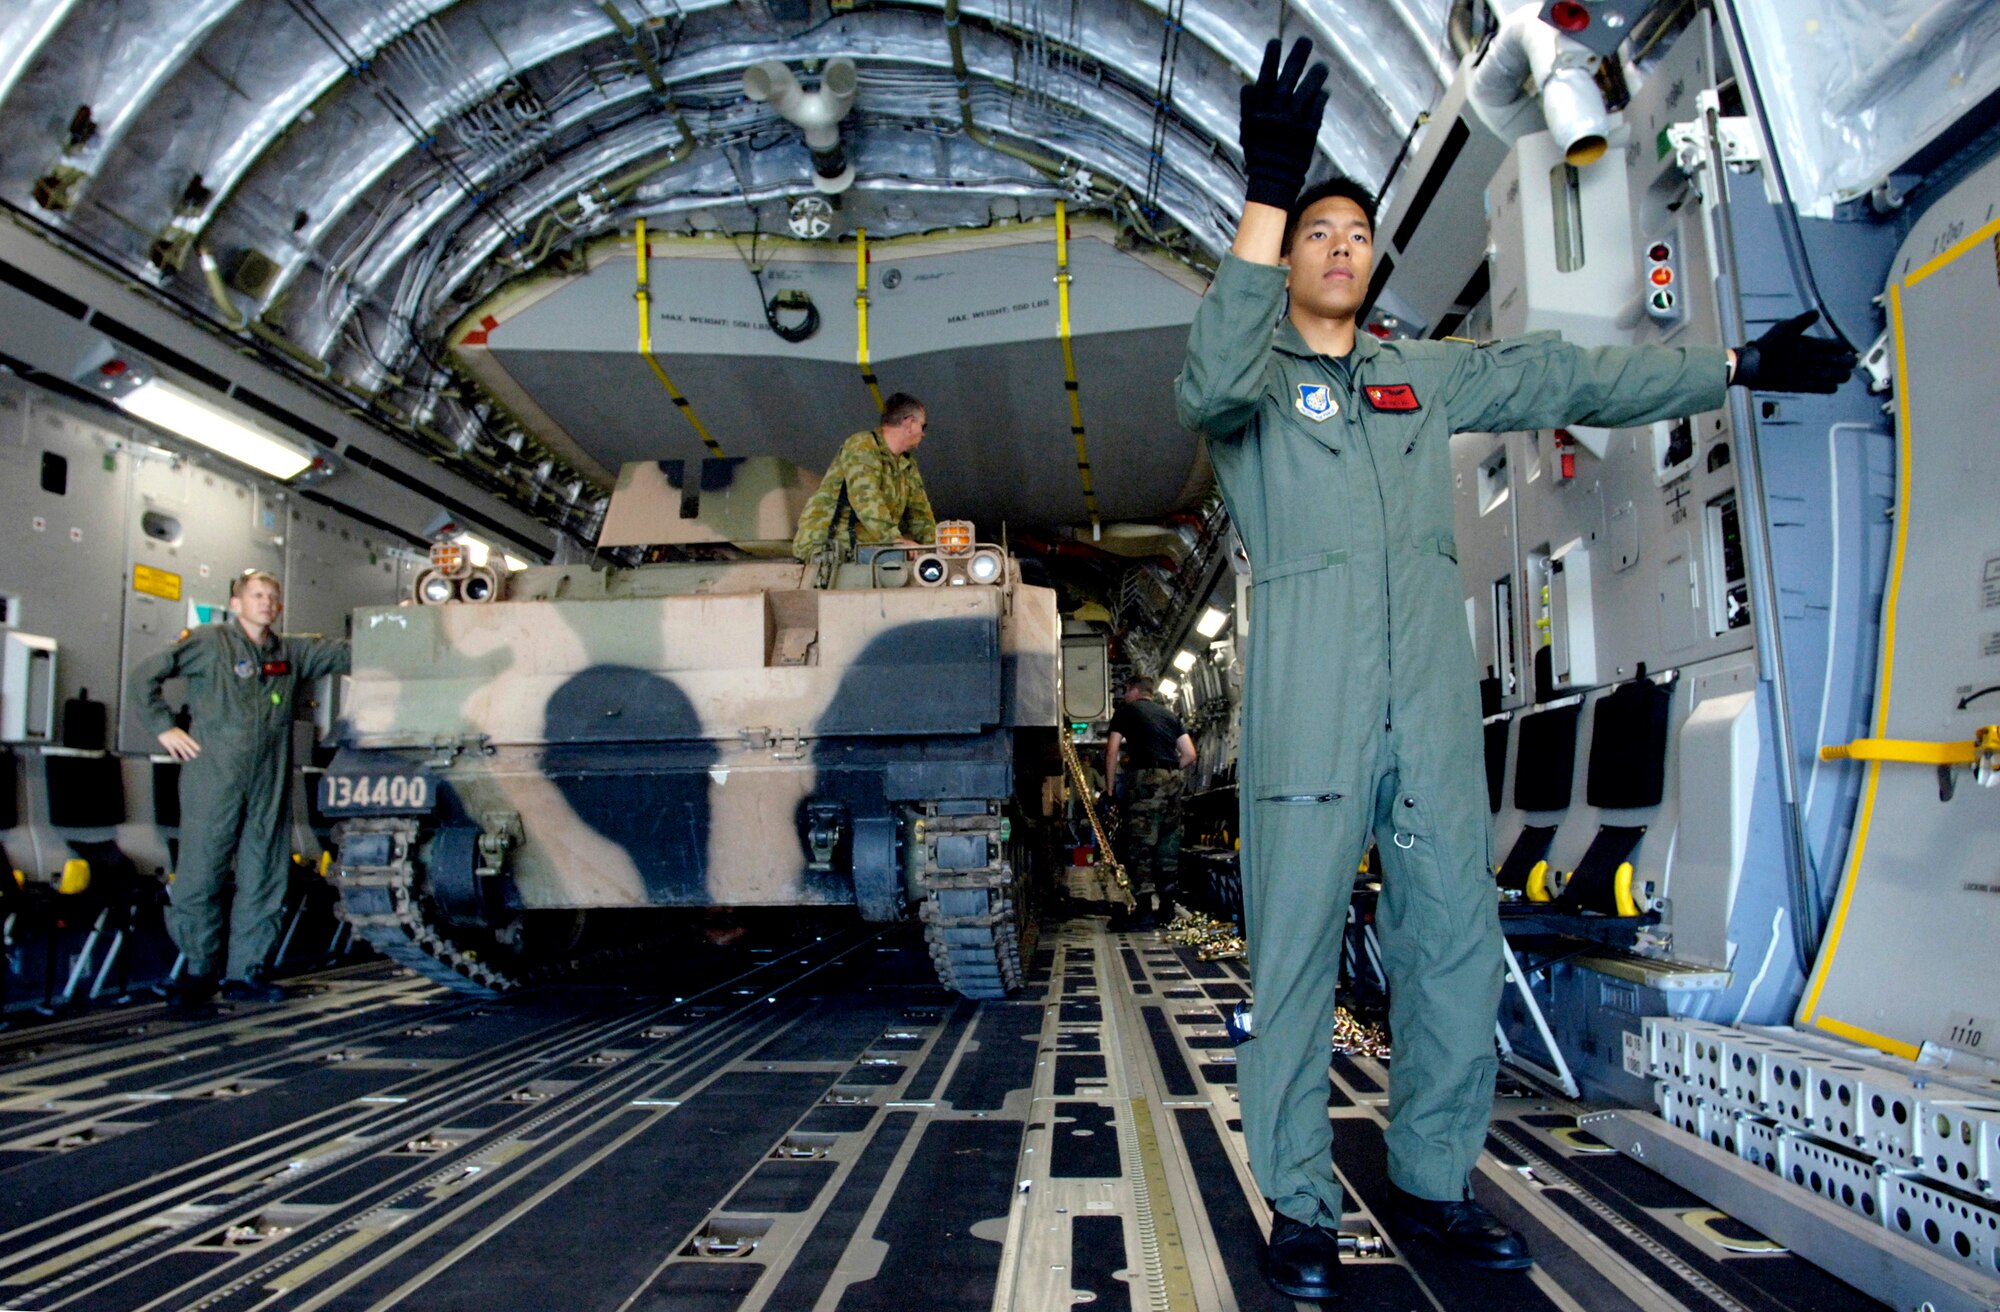 Airman James Ngo marshals in a second armored personnel carrier onto a C-17 Globemaster III at Royal Australian Air Force Base Townsville, Australia, on Tuesday, May 30, 2006. Two C-17s from the 15th Airlift Wing and the Hawaii Air National Guard's 154th Wing at Hickam Air Force Base, Hawaii, are helping the Australian Defense Force reposition its forces in Australia to better support peace operations in East Timor. Airman Ngo is assigned to the 535th Airlift Squadron. (U.S. Air Force photo/Tech. Sgt. Shane A. Cuomo) 